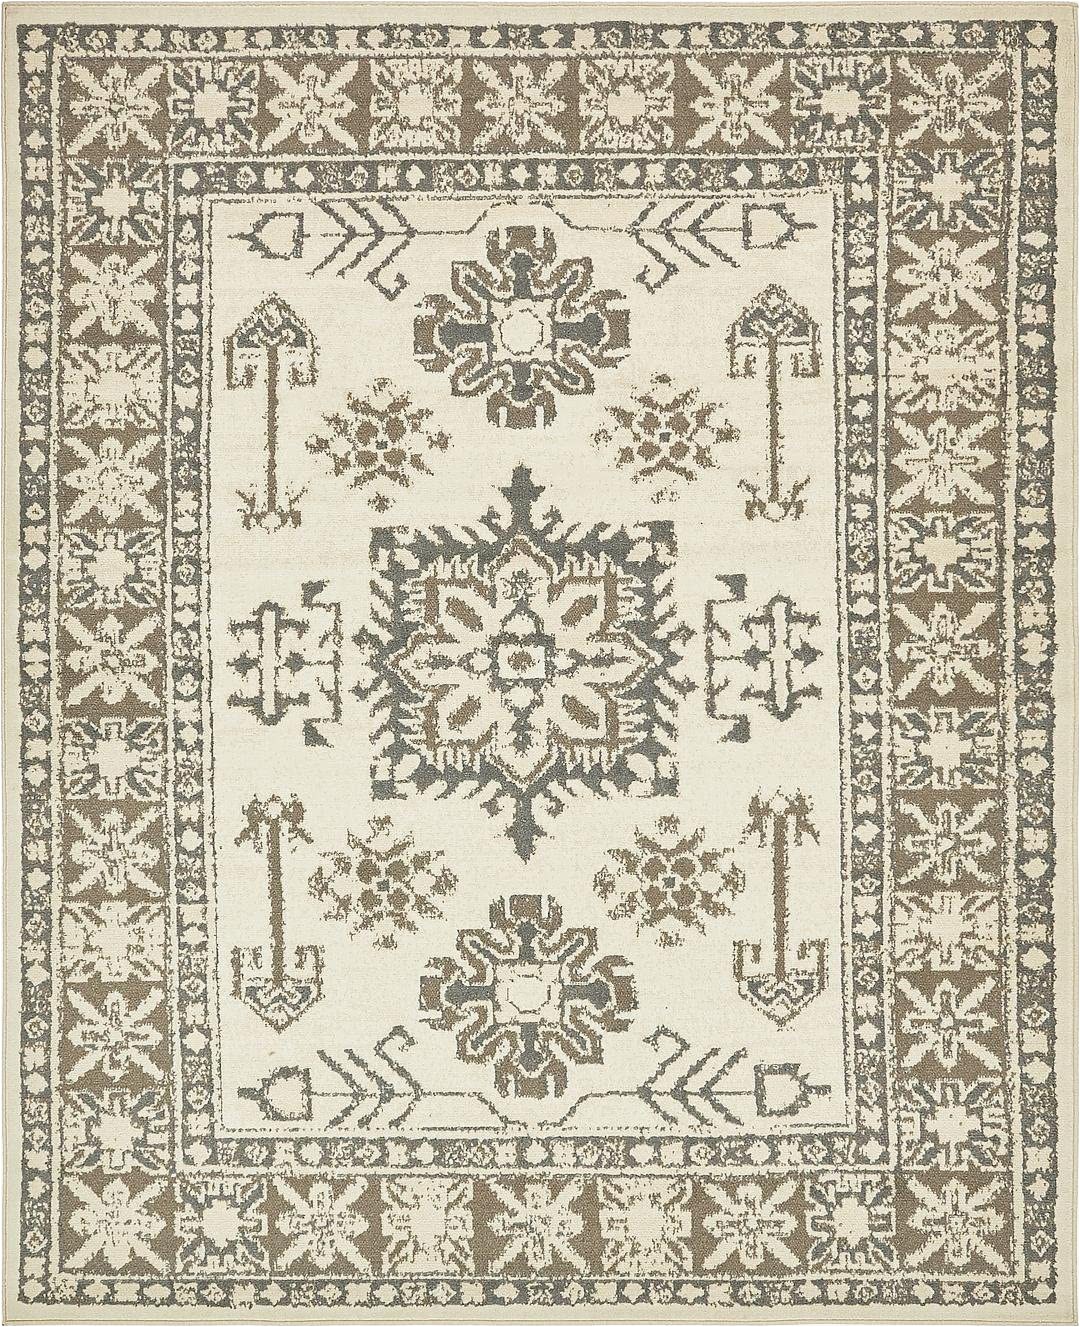 8 by 10 area Rugs for Sale Amazon Turkish 8 X 10 area Rug Carpet Persian Design